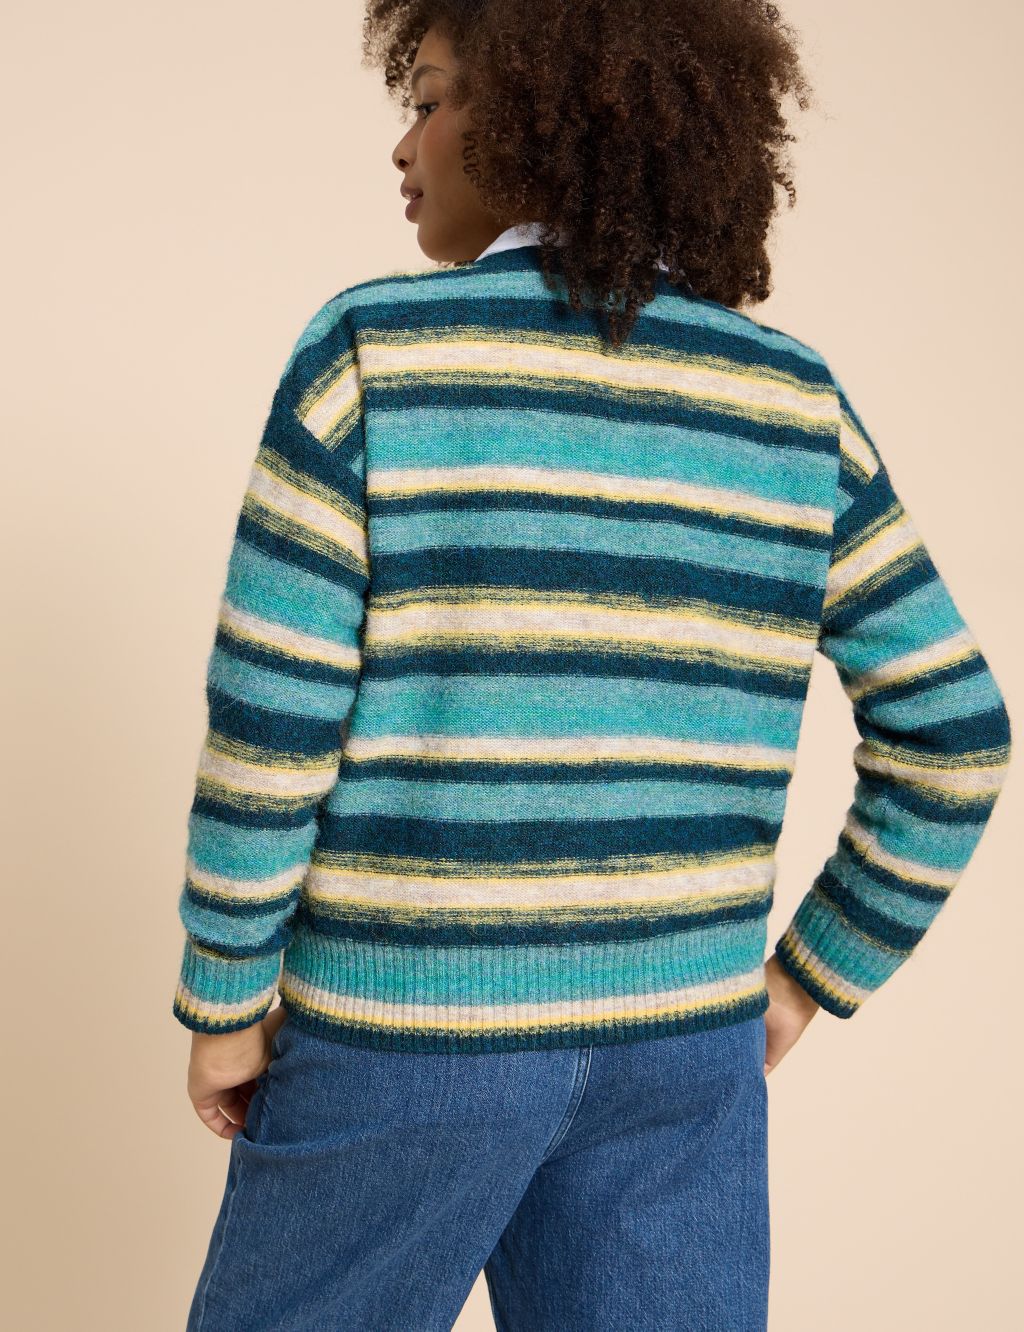 Recycled Blend Striped Crew Neck Jumper | White Stuff | M&S